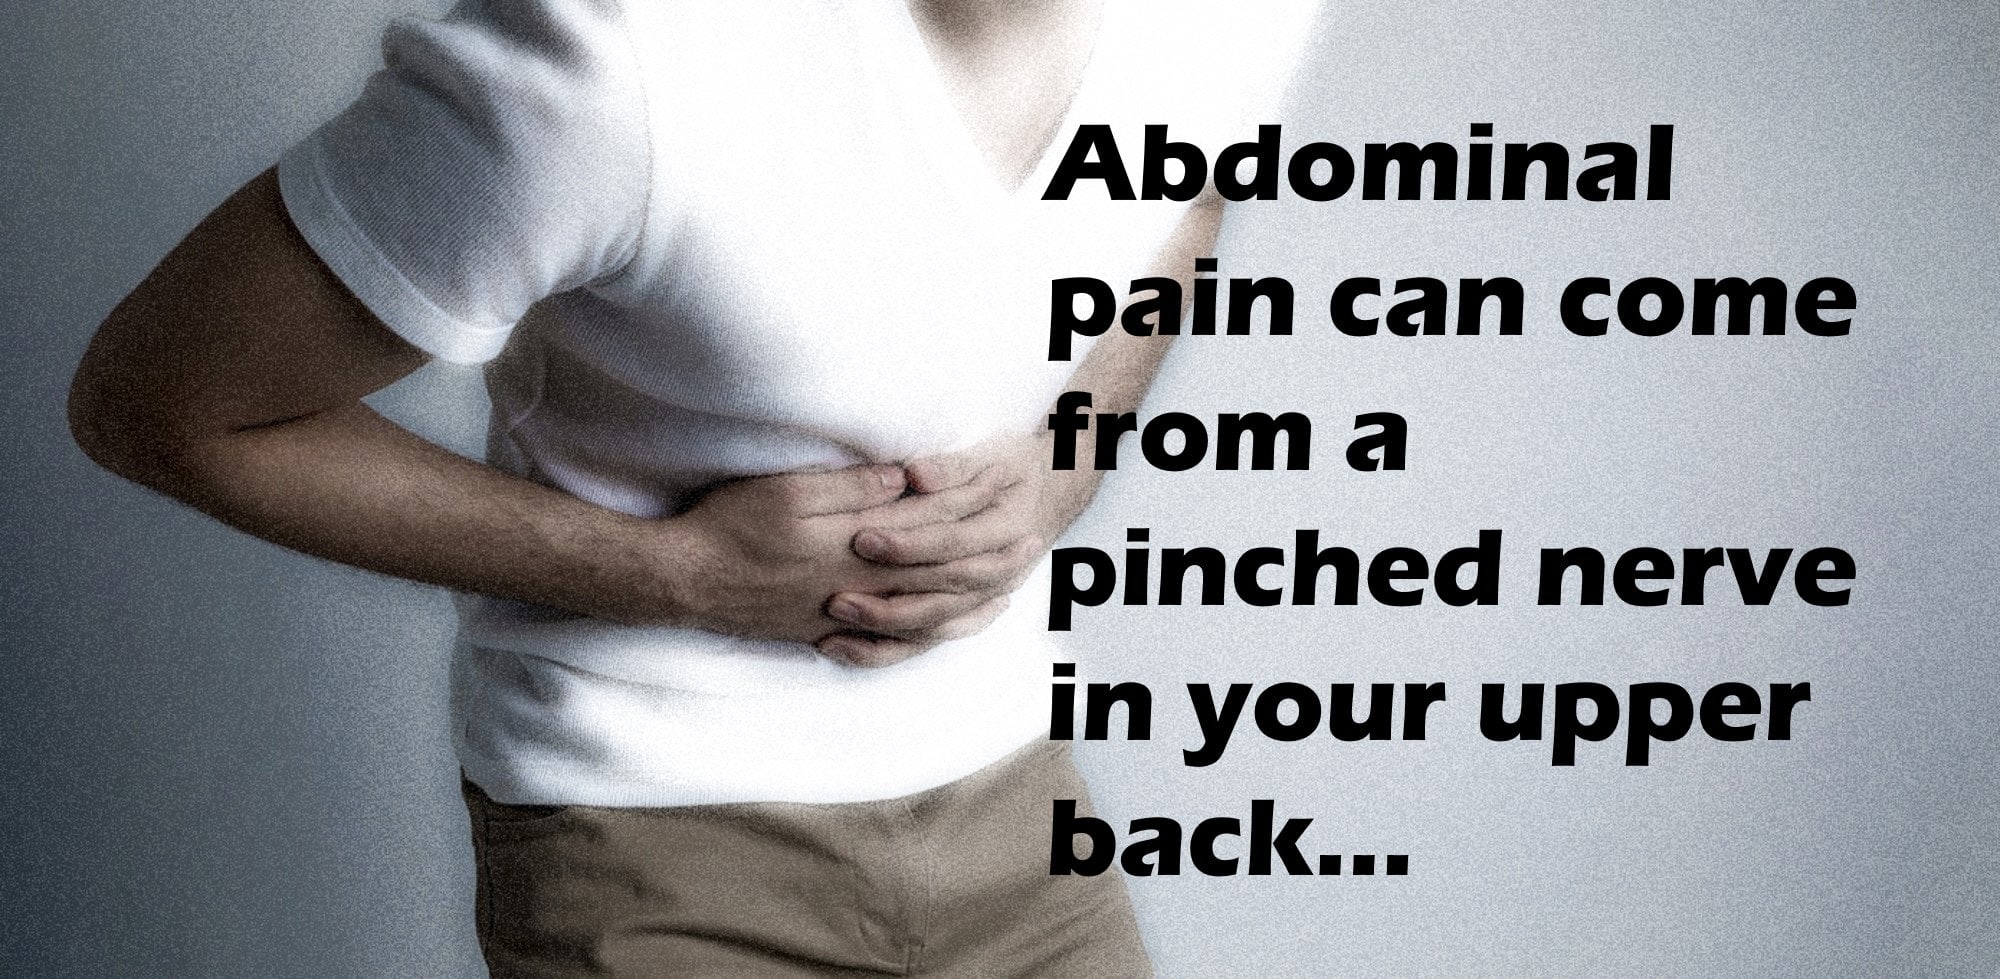 upper back stomach pain